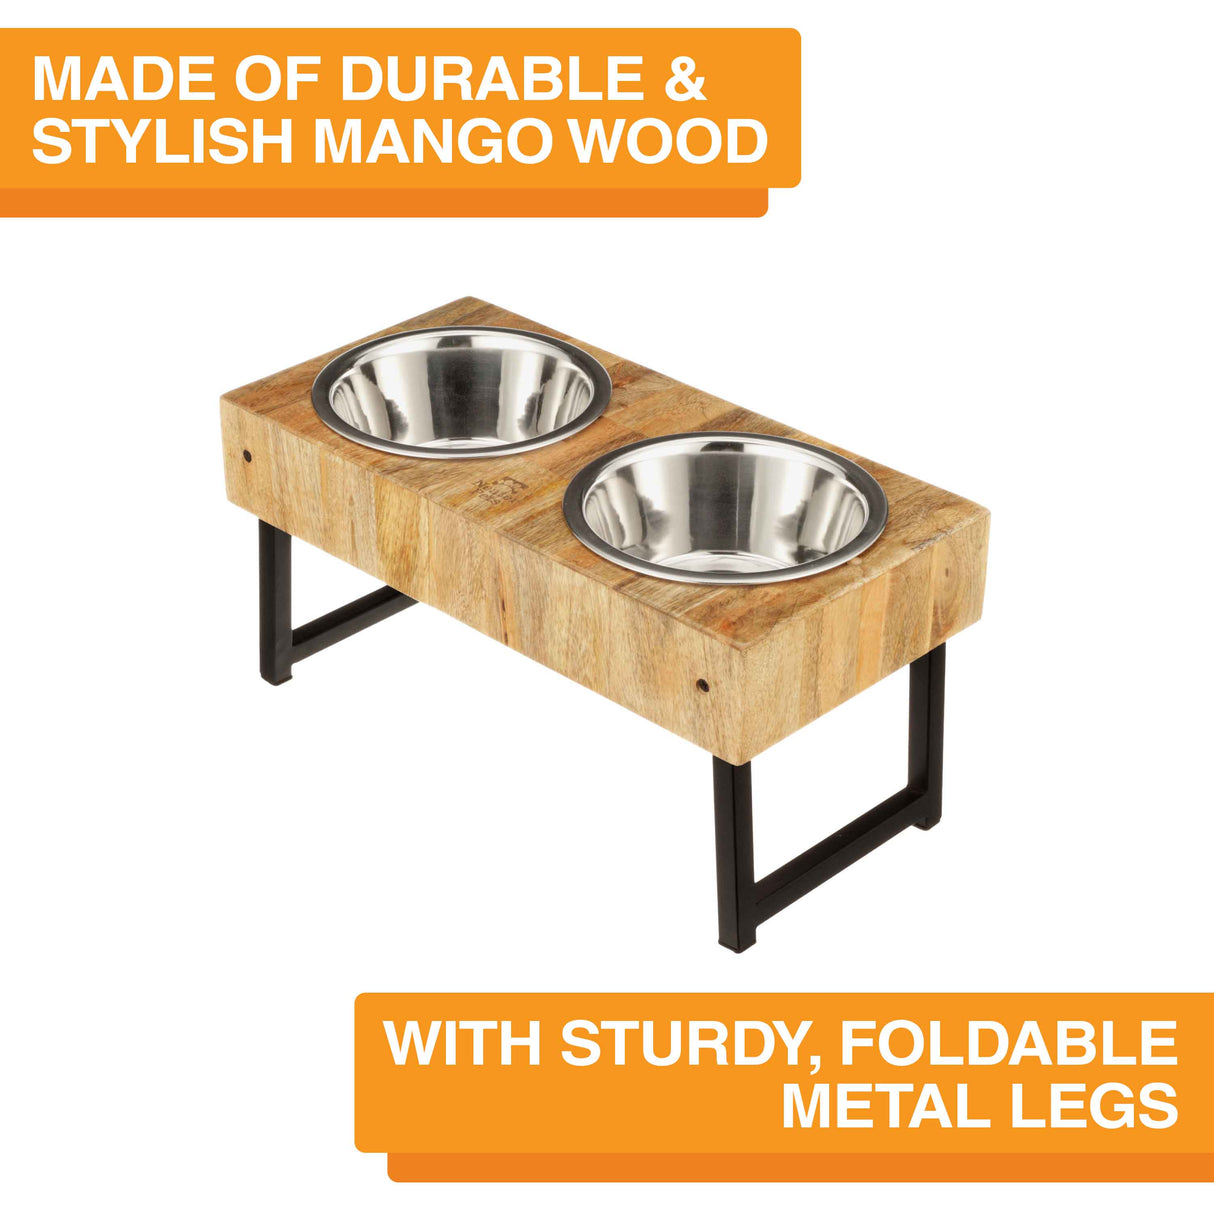 Feeder is made of mango wood with foldable metal legs